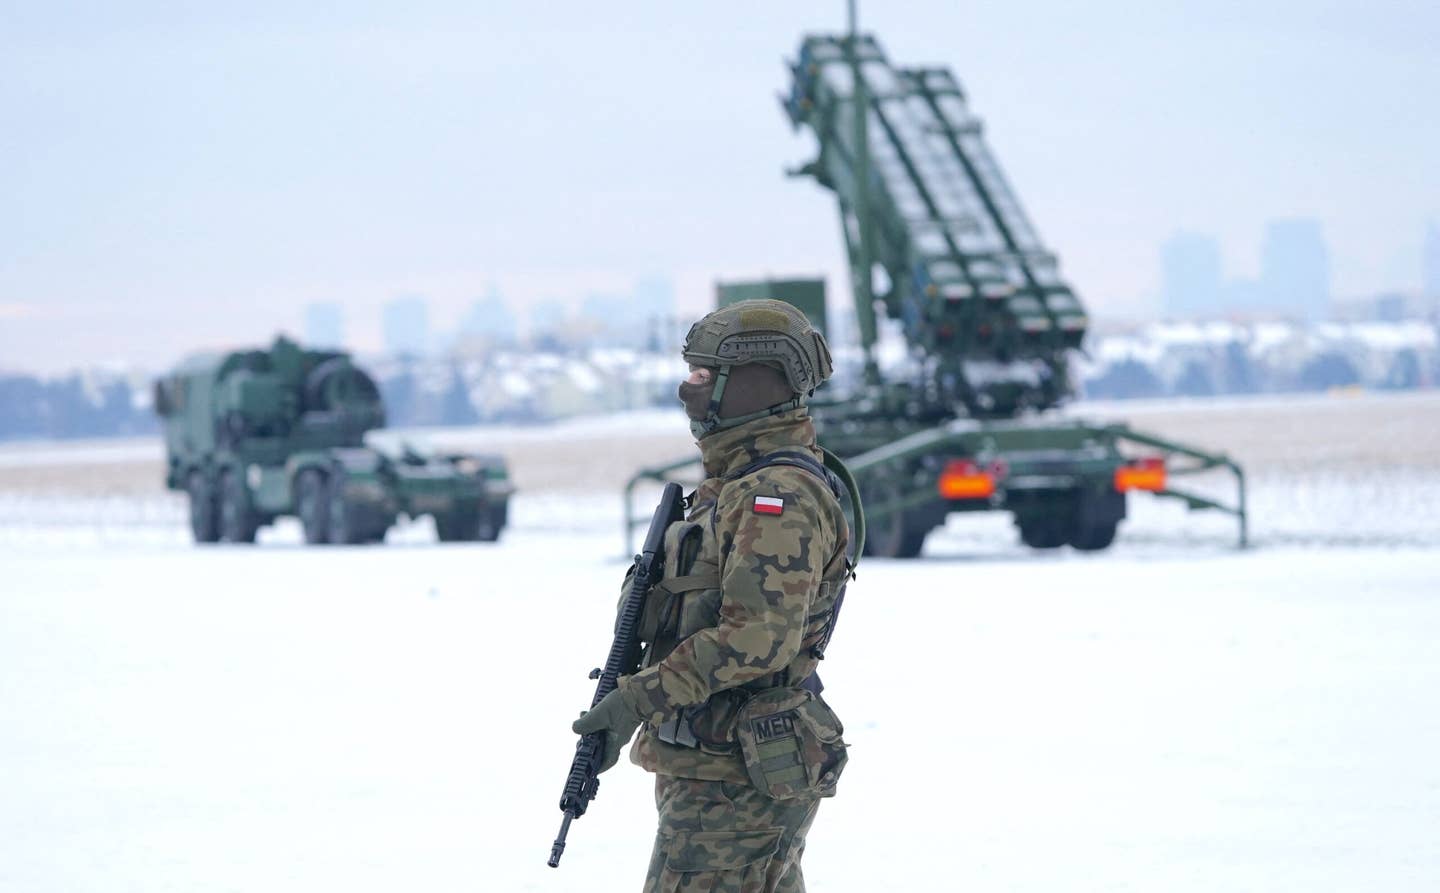 A Polish soldier stands in front of a Patriot air defense system deployed during a military exercise at Warsaw Babice Airport, Poland, on February 7, 2023. <em>Photo by JANEK SKARZYNSKI/AFP via Getty Images</em>